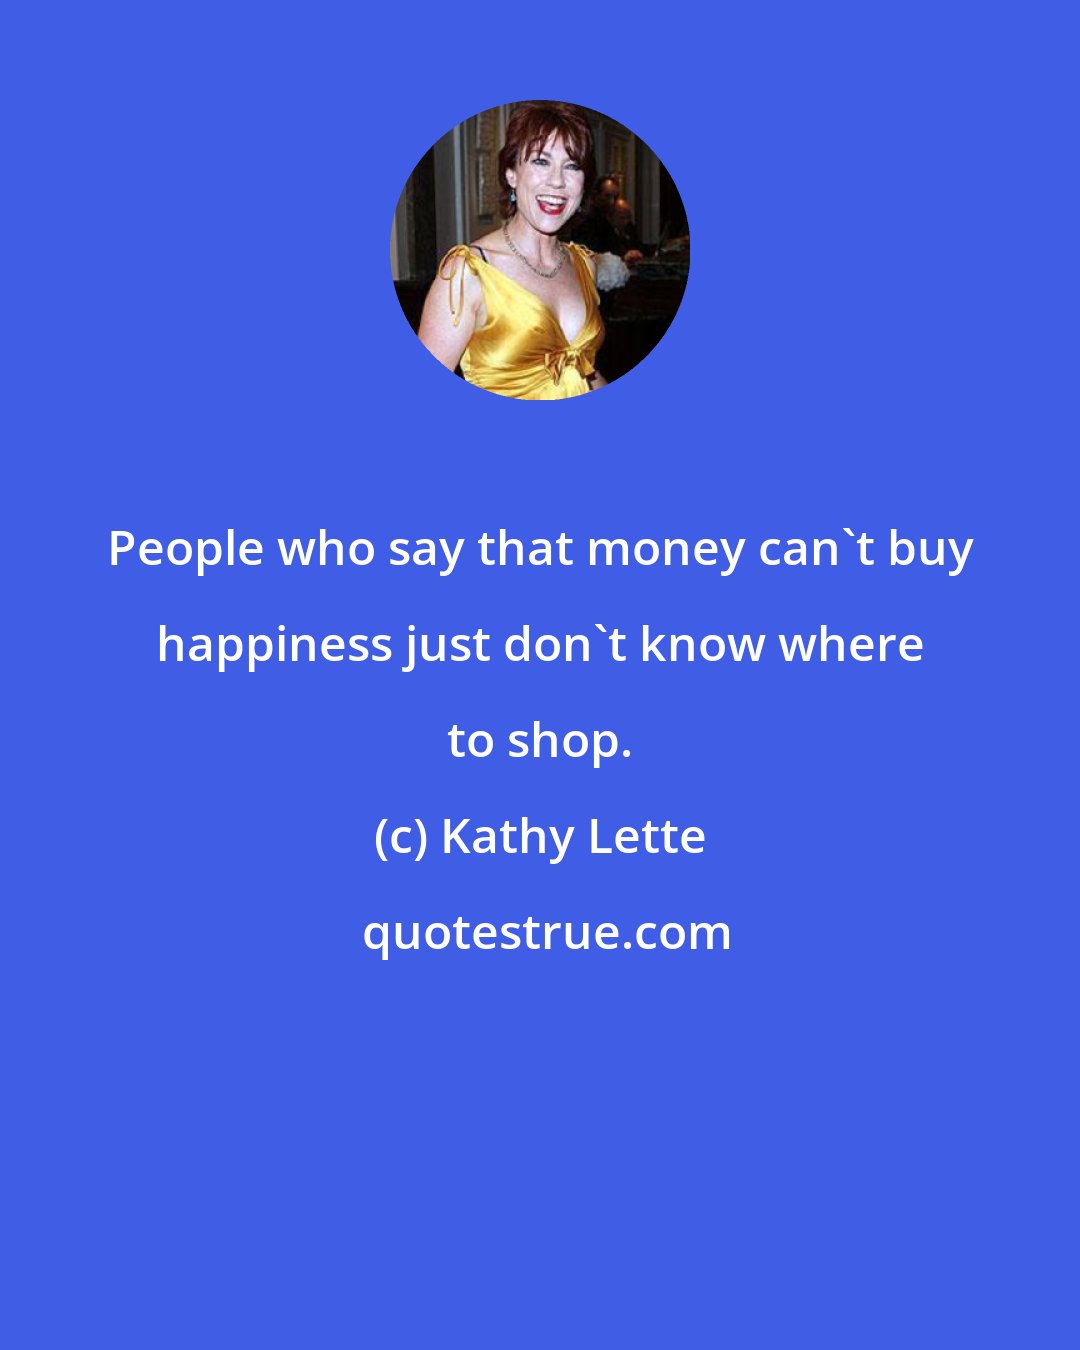 Kathy Lette: People who say that money can't buy happiness just don't know where to shop.